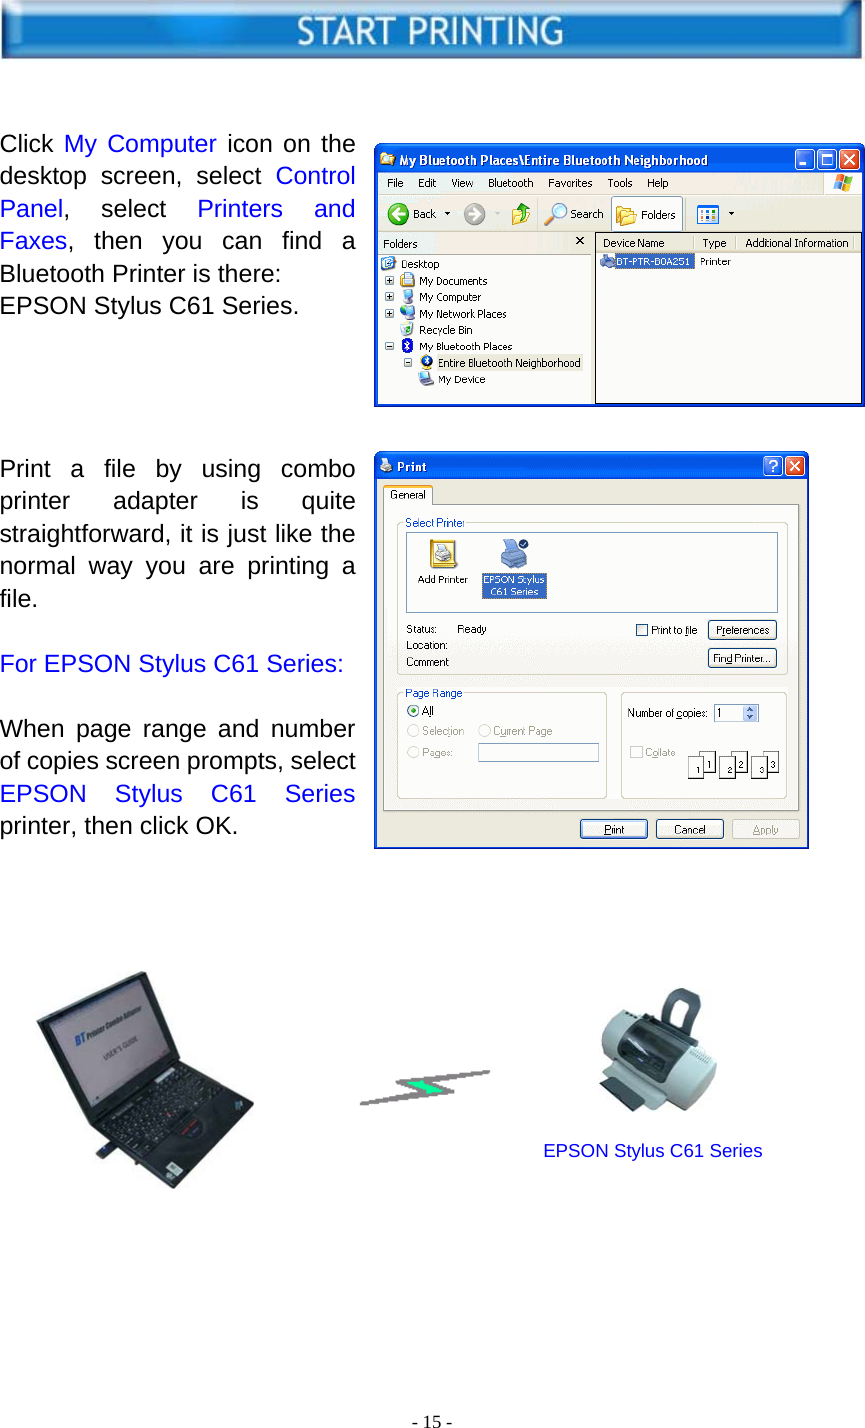  - 15 -   START PRINTING   Click My Computer icon on the desktop screen, select Control Panel, select Printers and Faxes, then you can find a Bluetooth Printer is there: EPSON Stylus C61 Series.     Print a file by using combo printer adapter is quite straightforward, it is just like the normal way you are printing a file.  For EPSON Stylus C61 Series:  When page range and number of copies screen prompts, select EPSON Stylus C61 Series printer, then click OK.          EPSON Stylus C61 Series       